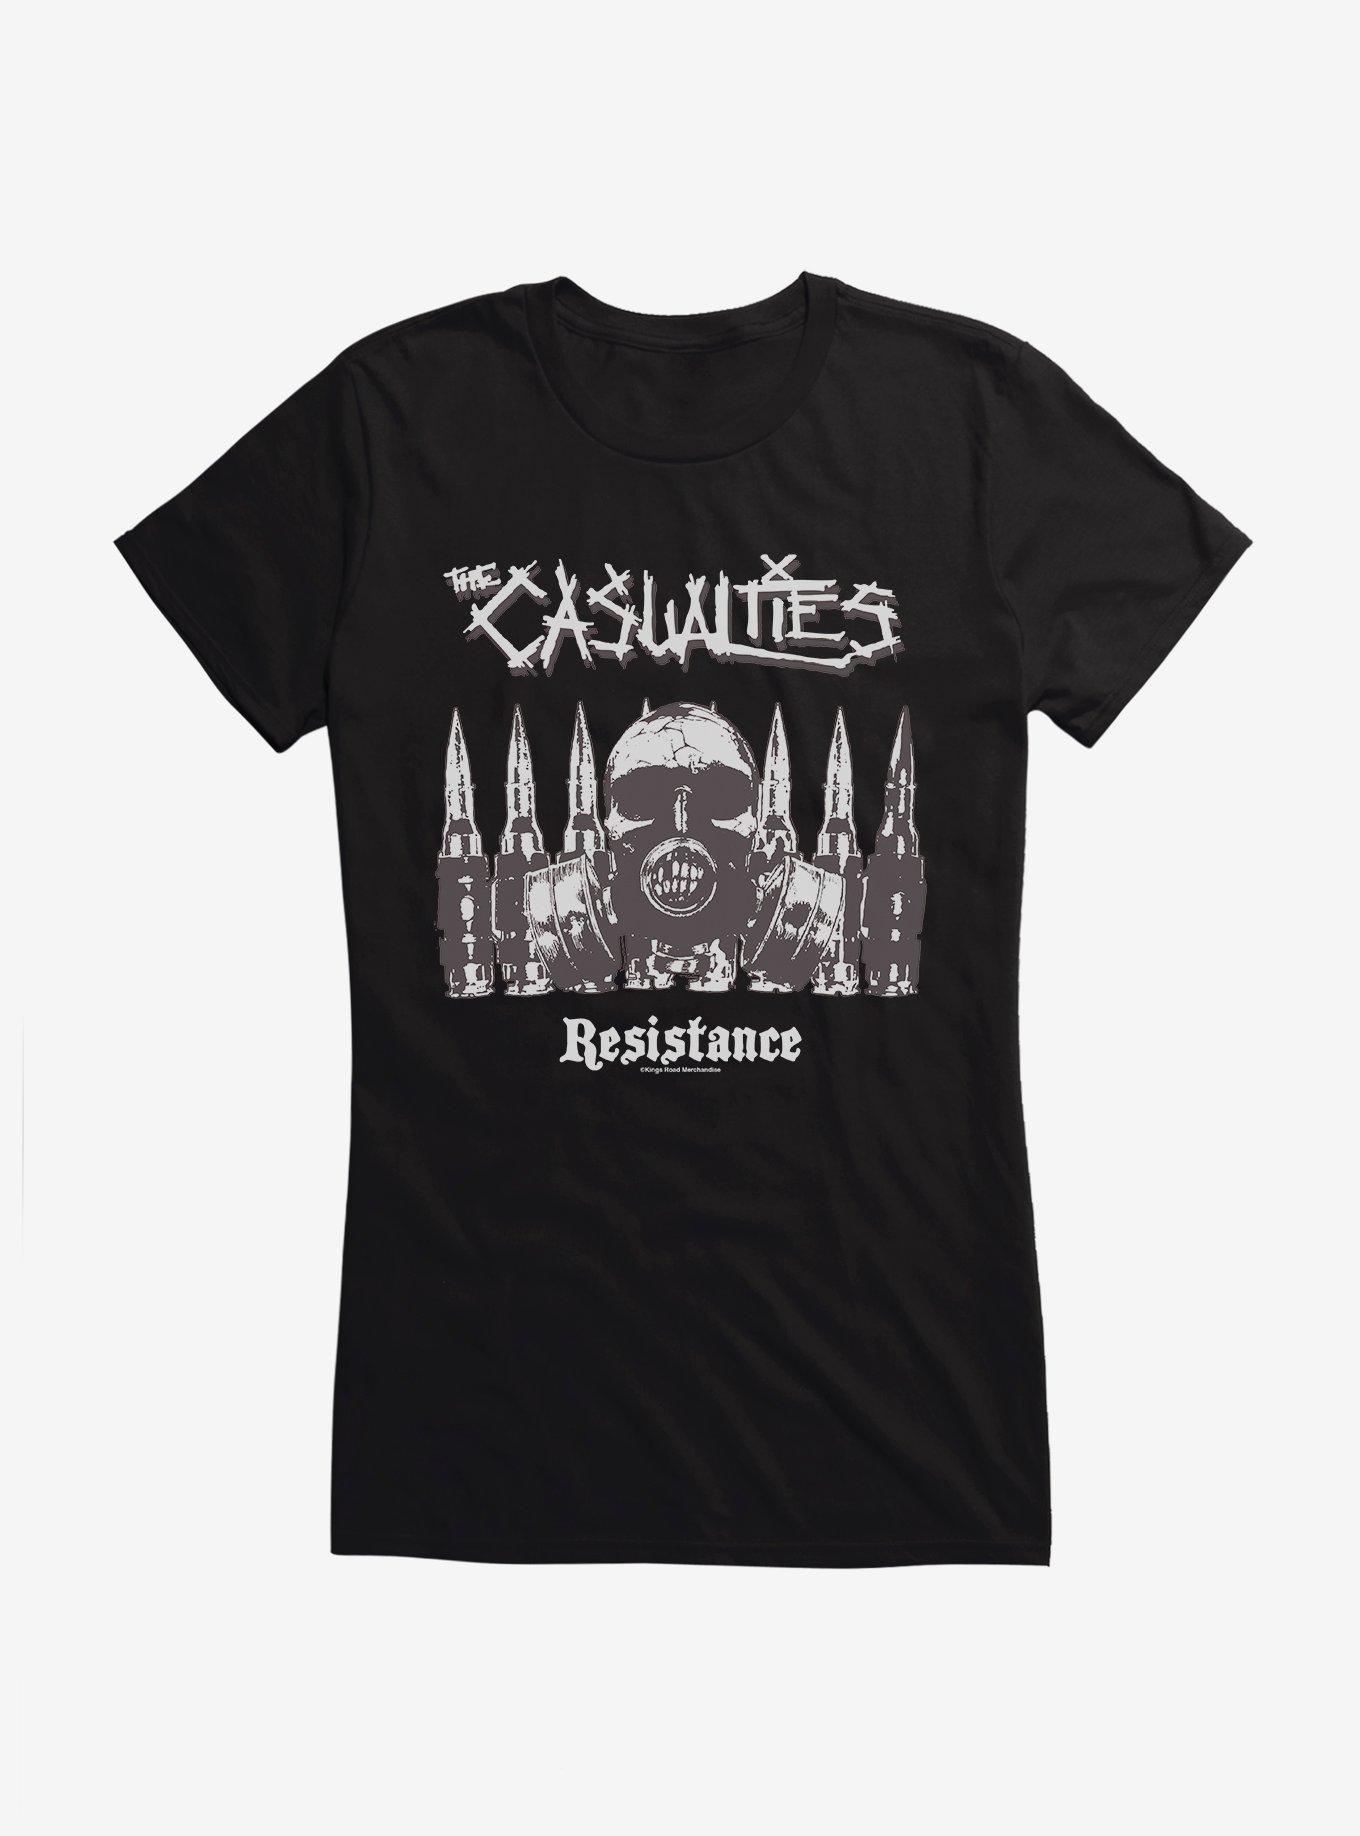 The Casualties Resistance Girls T-Shirt